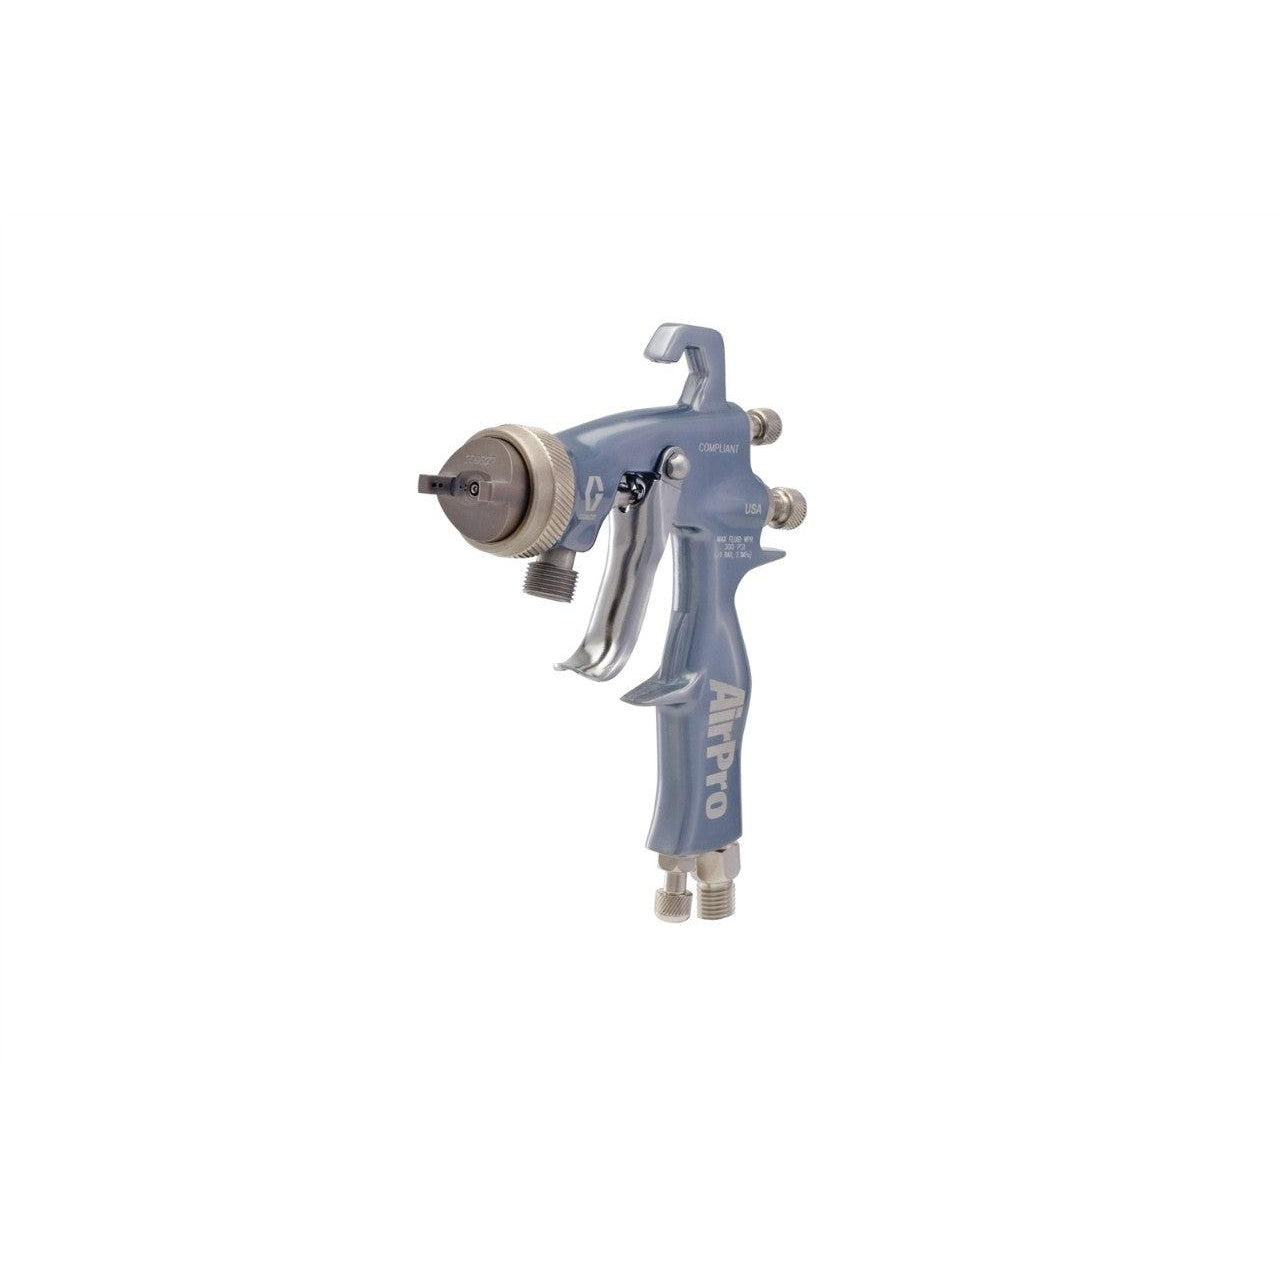 AirPro Air Spray Pressure Feed Gun, Compliant, 0.070 inch (1.8 mm) Nozzle, SST Tip, for General Metal Applications